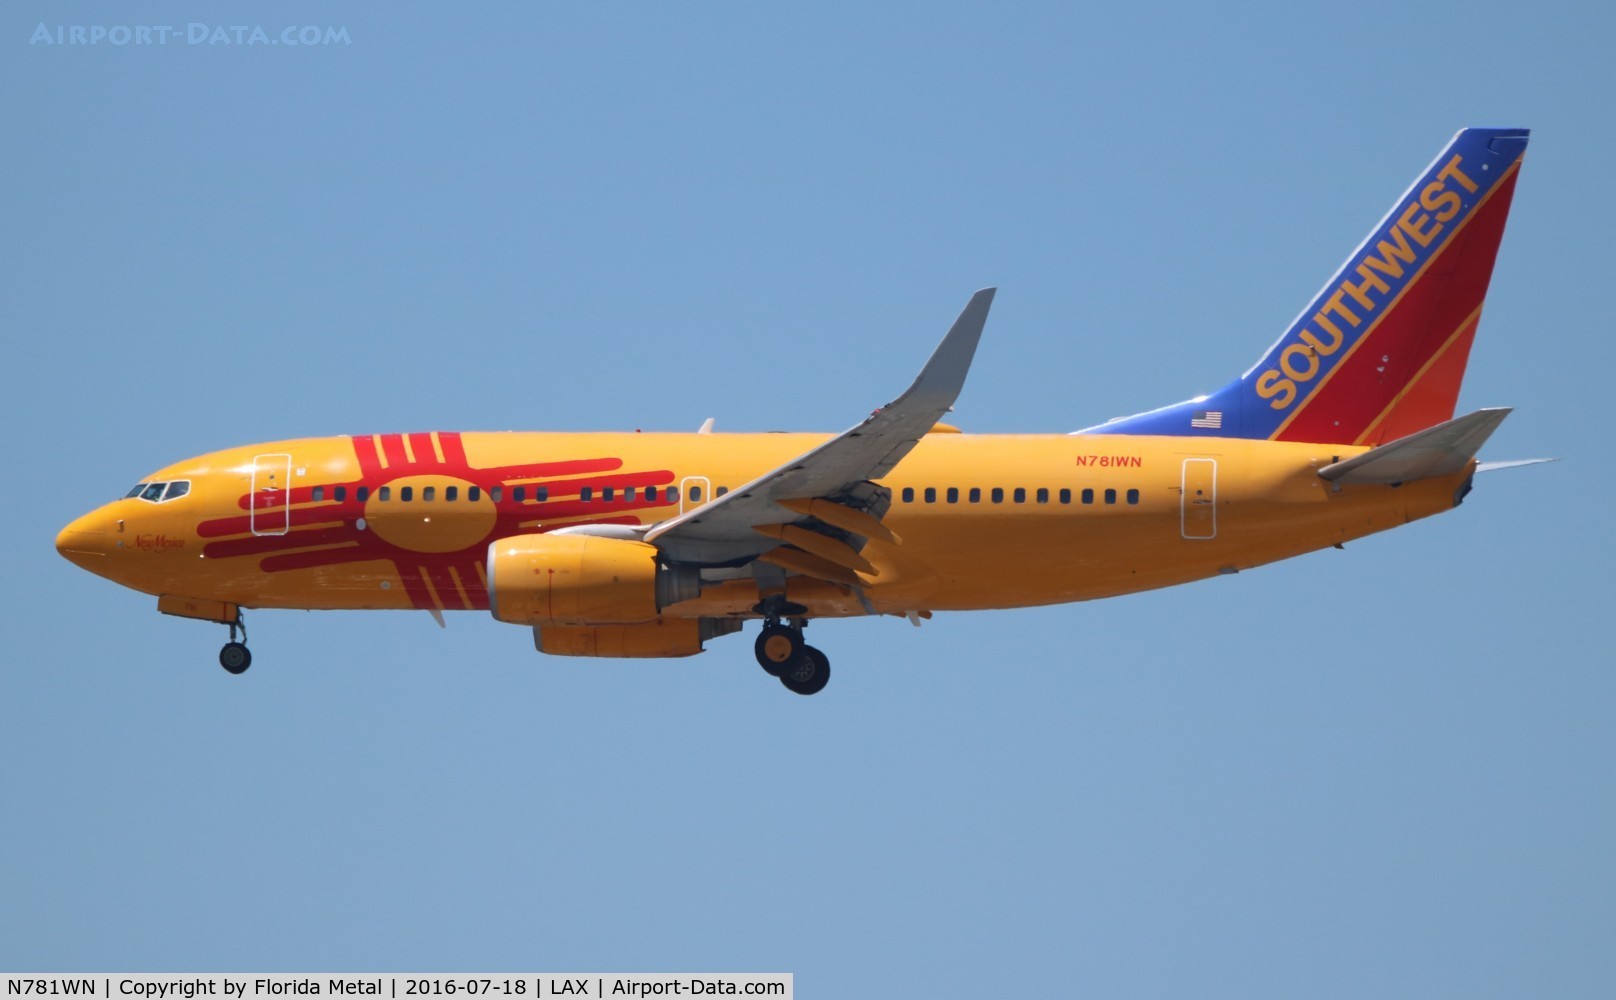 N781WN, 2000 Boeing 737-7H4 C/N 30601, New Mexico One